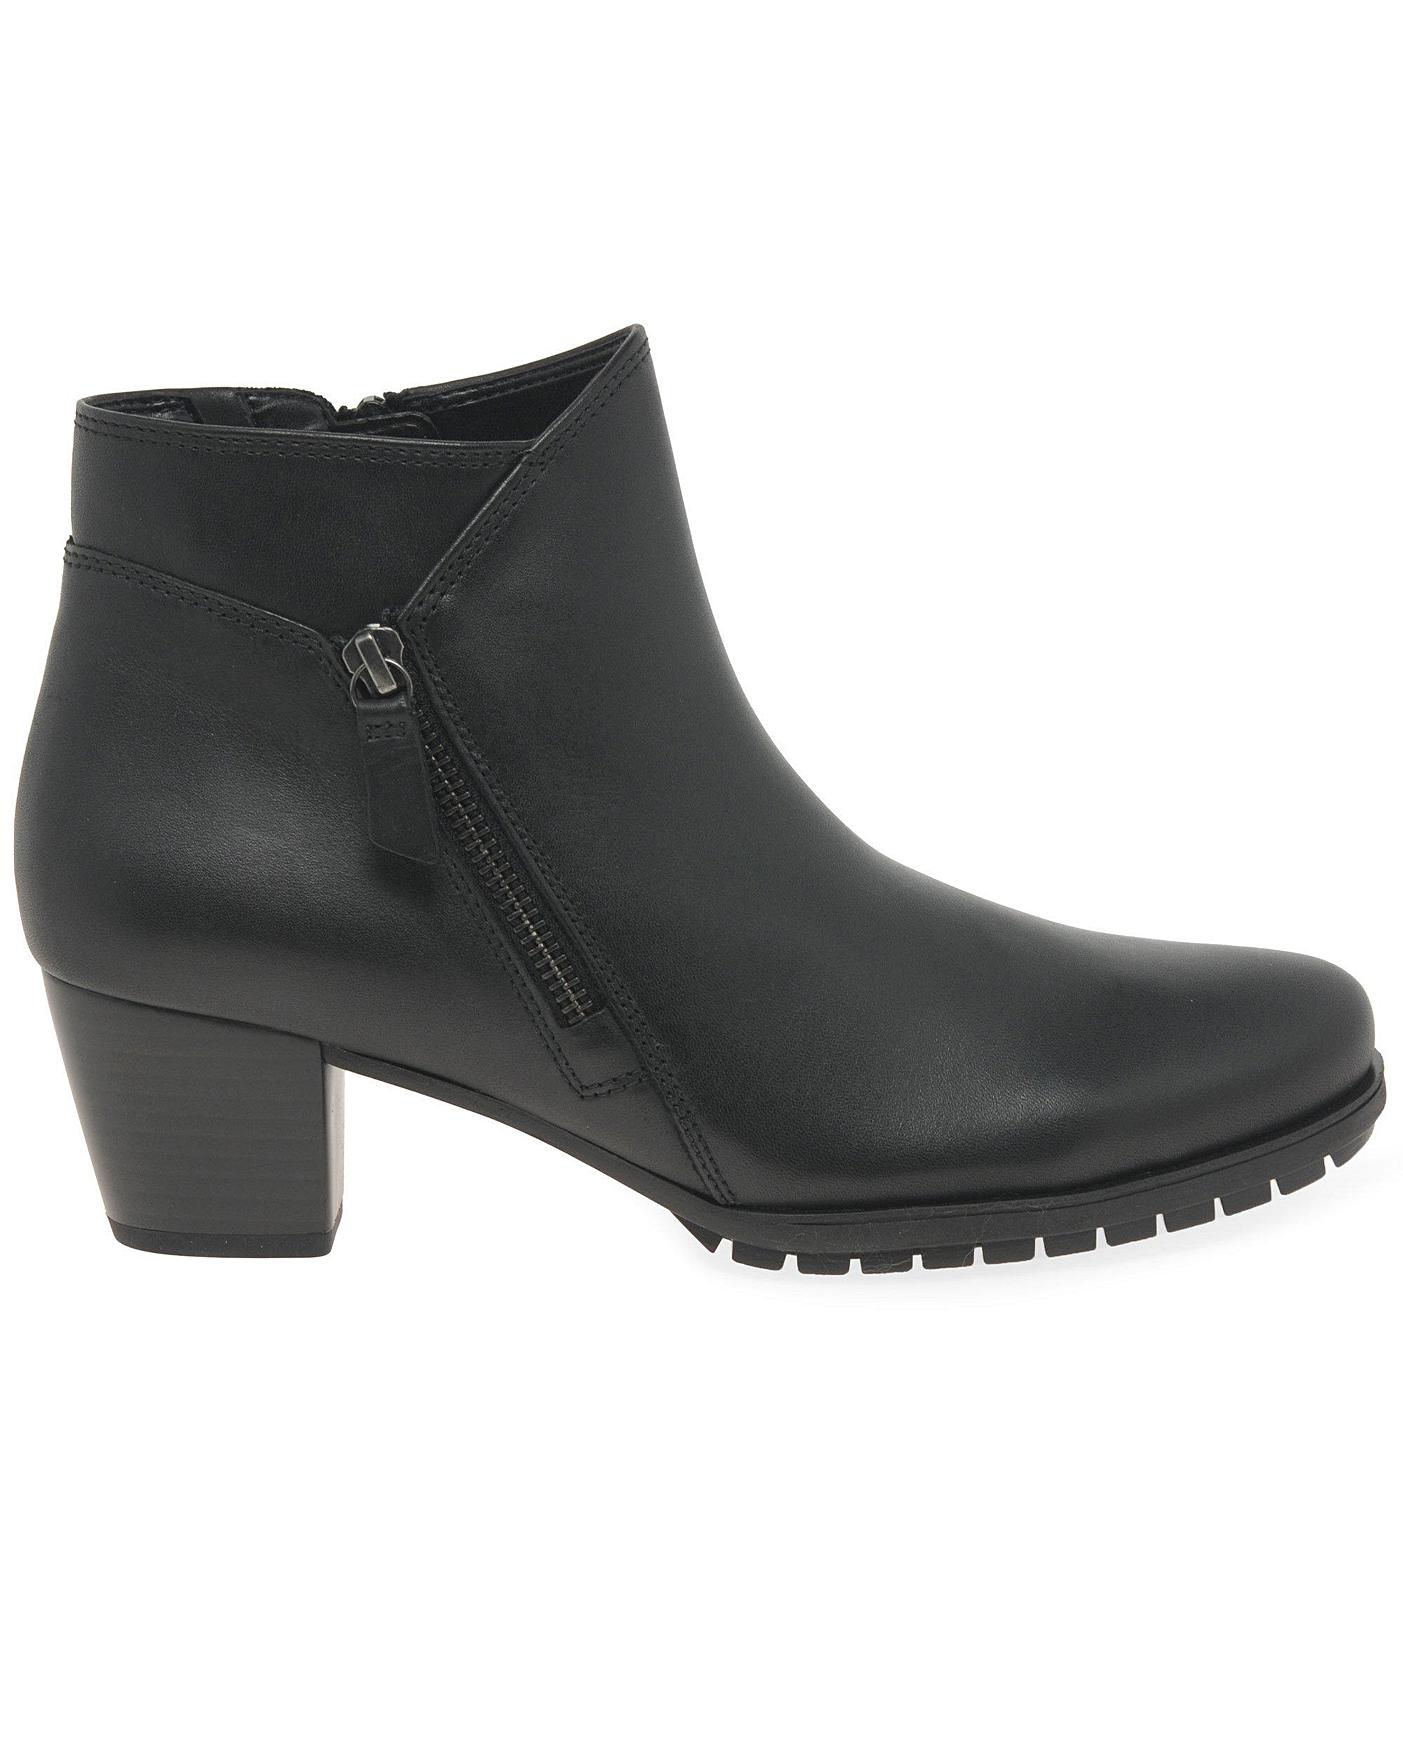 Gabor Olivetti Wide Fit Ankle Boots | J D Williams